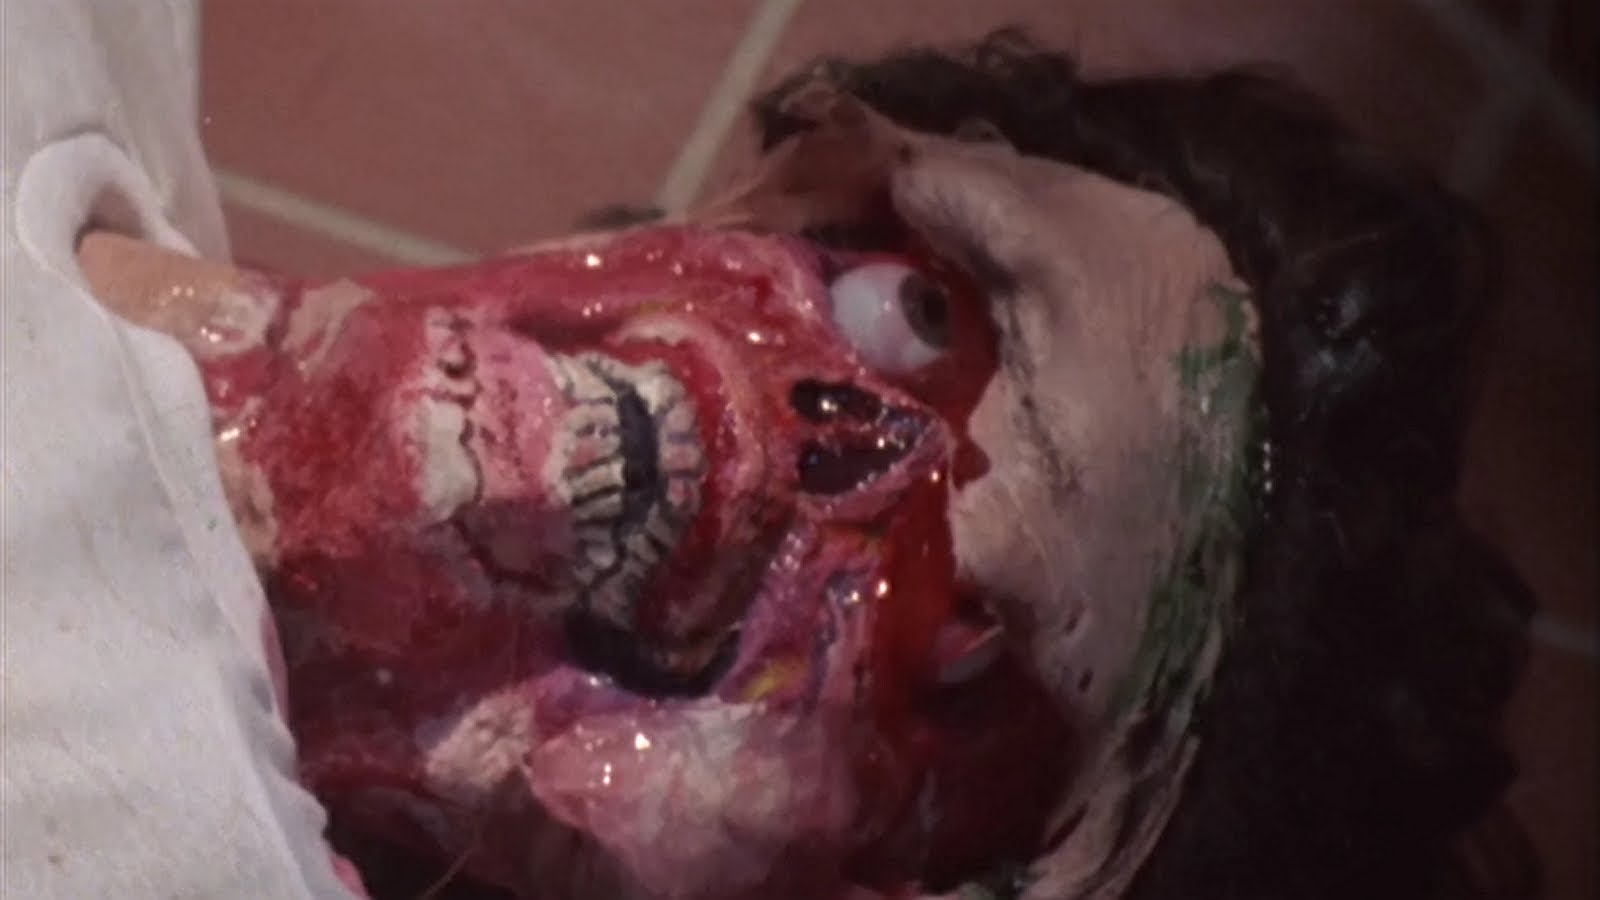 http://sinsofcinema.com/Images/Theres%20Nothing%20Out%20There/Theres%20Nothing%20Out%20There%20Troma%20DVD.jpg